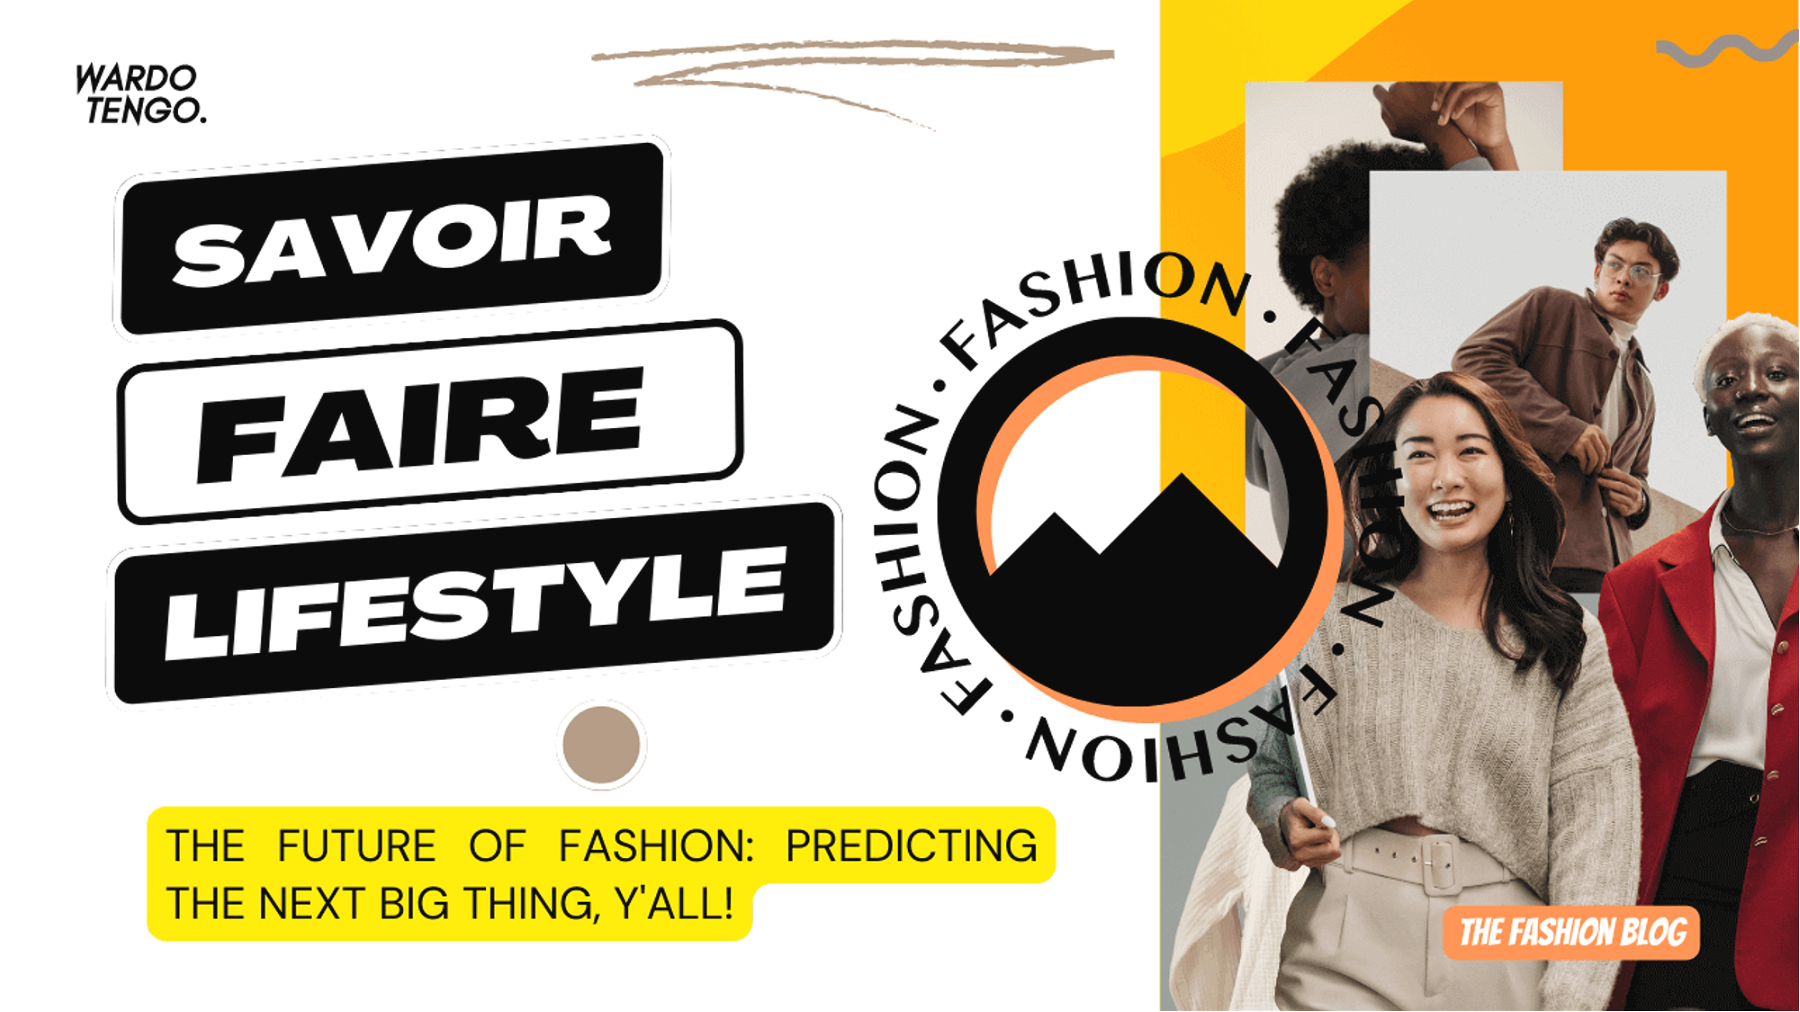 The Future of Fashion: Predicting The Next Big Thing, Y'all!